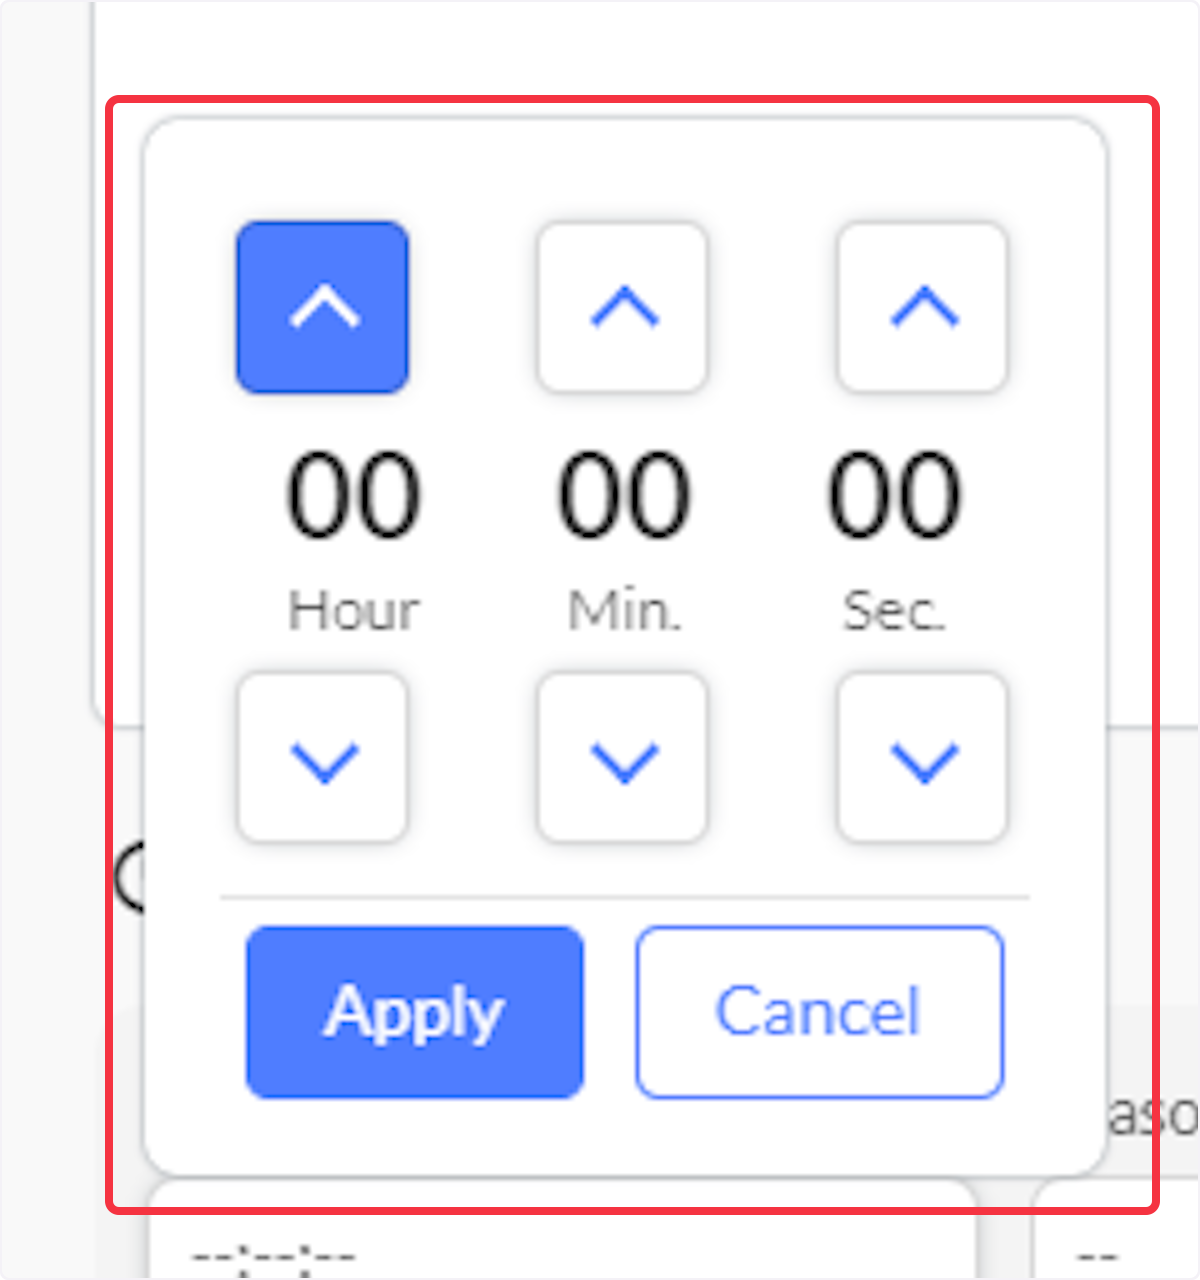 Select to input Hours, Minutes, Seconds then Apply time to adjust.